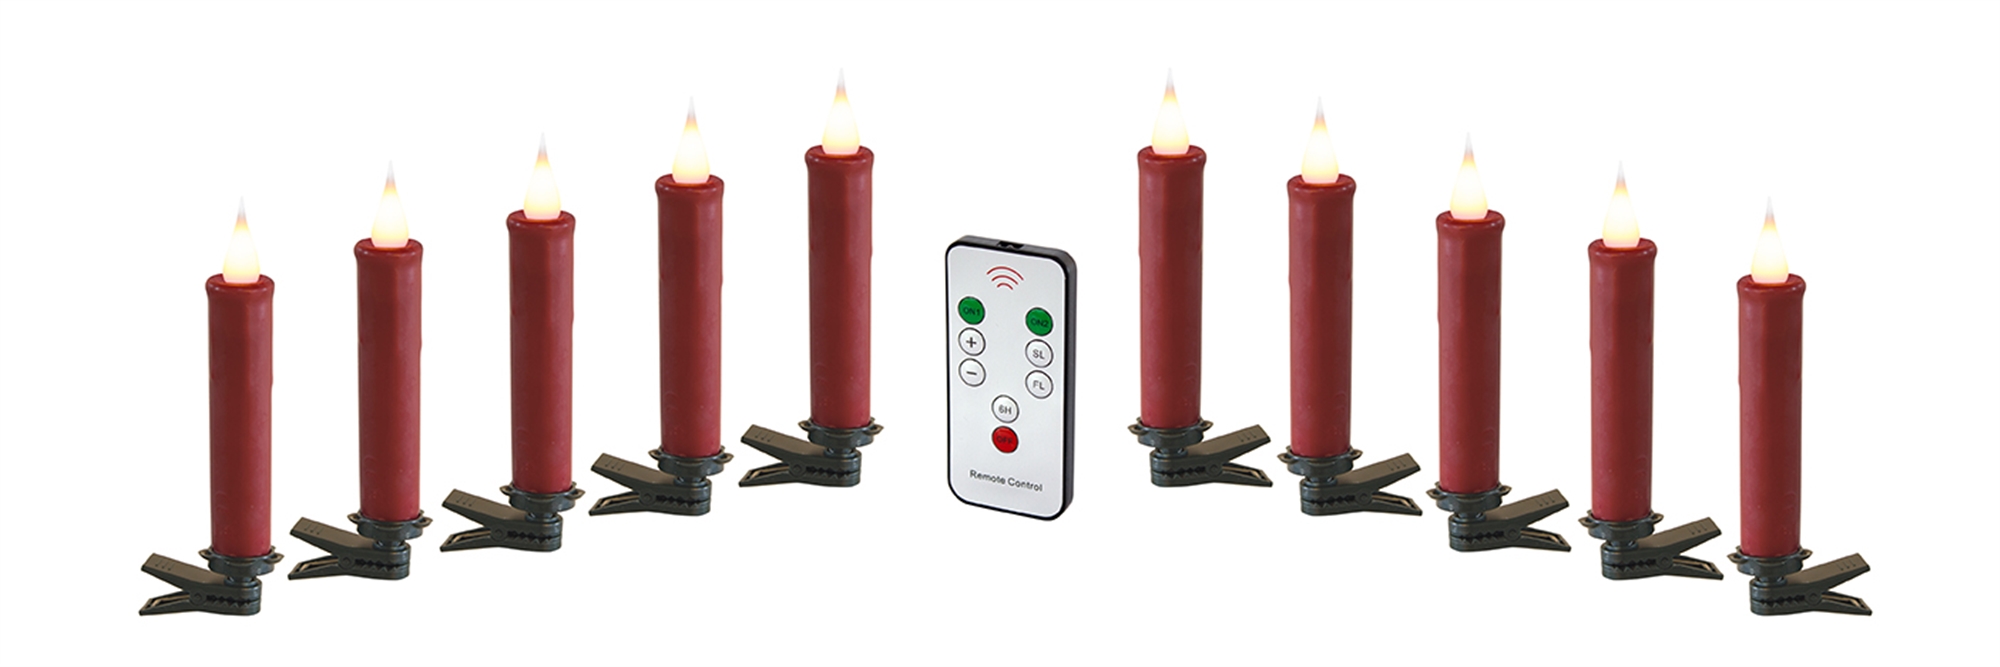 Clip-On Candle (Set of 10) 4.5"H (includes remote) Plastic